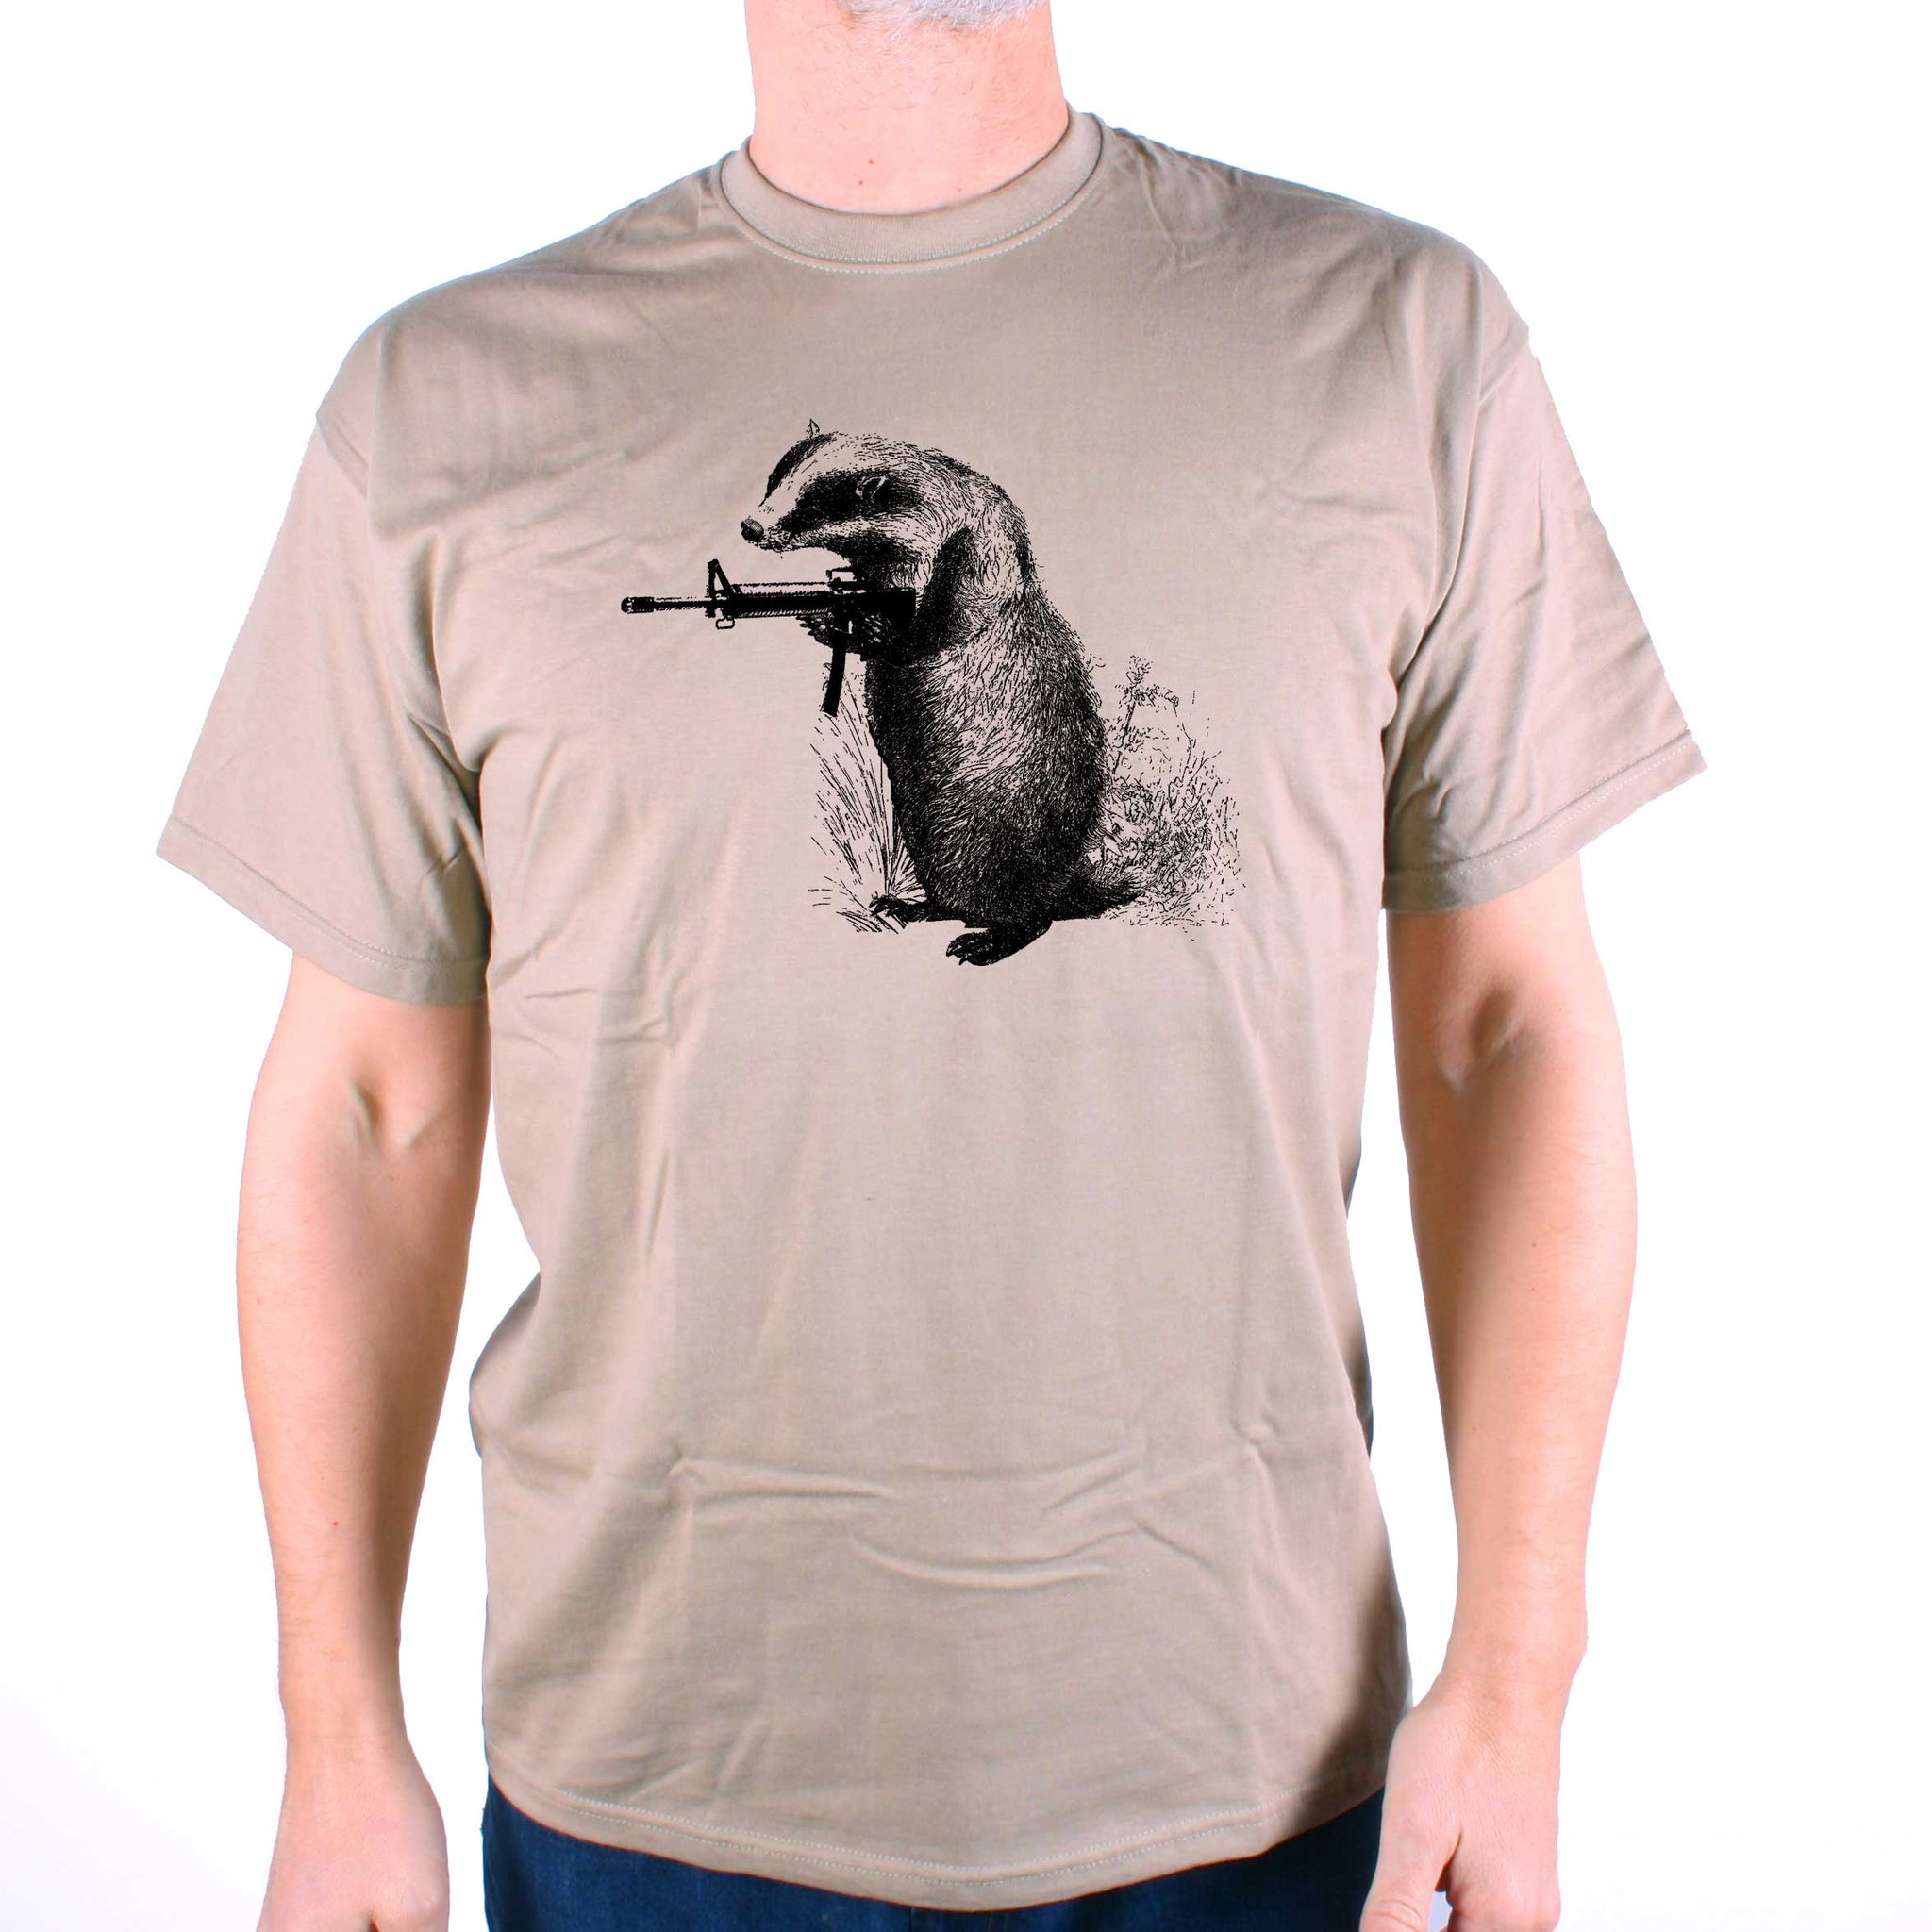 Badger Cull T Shirt - Badgers Fight Back